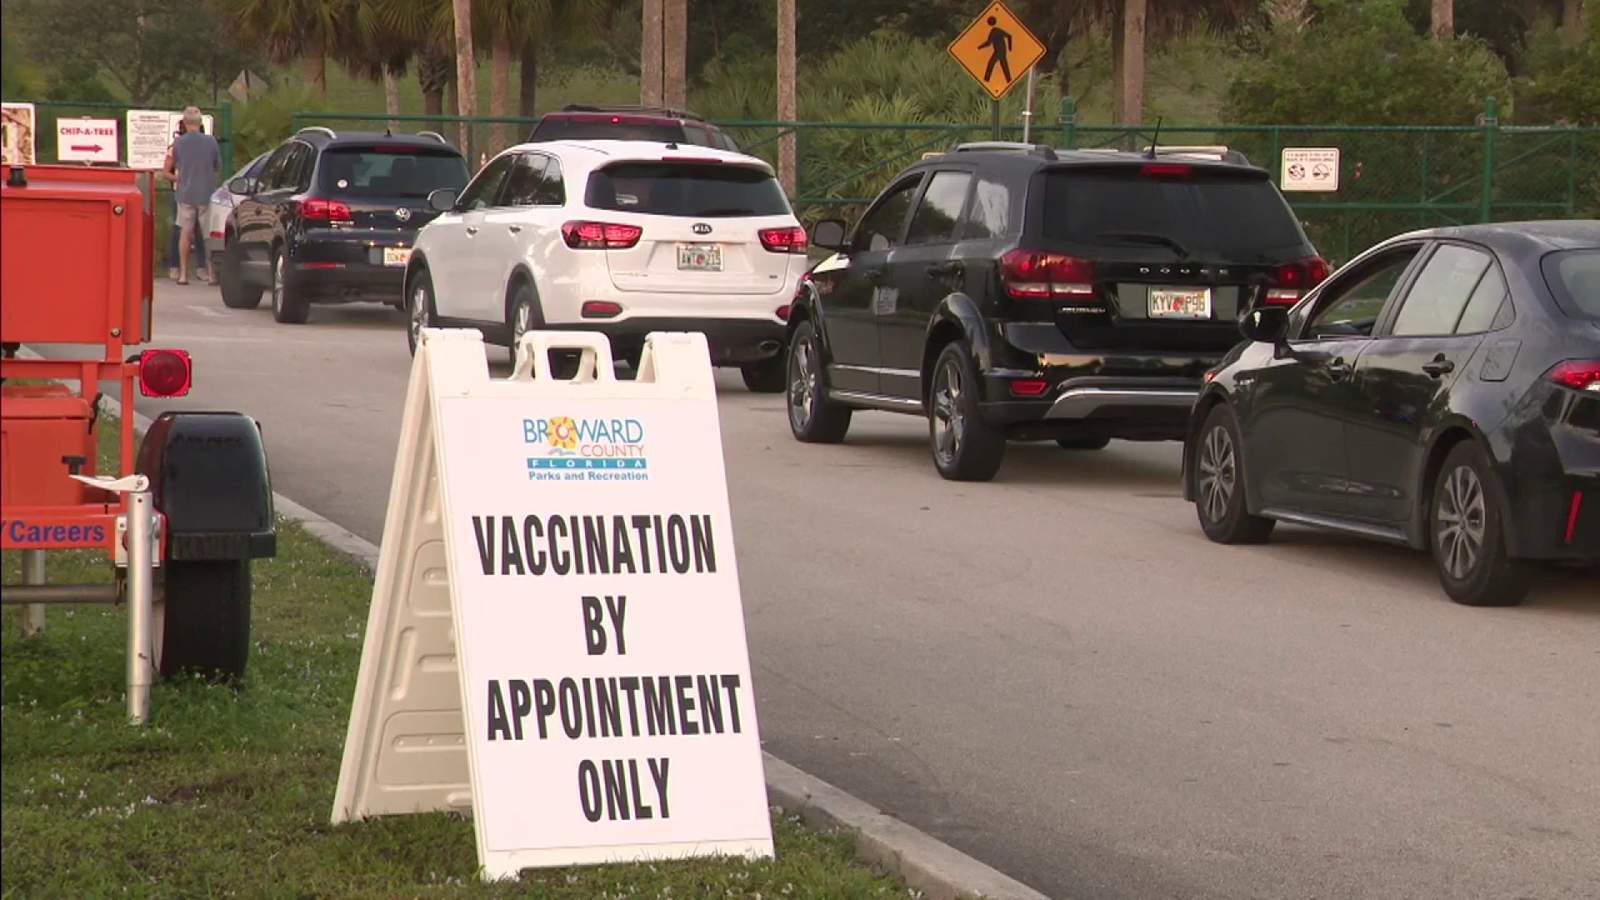 Day one rolling out the COVID-19 vaccine in Broward County is less than smooth sailing